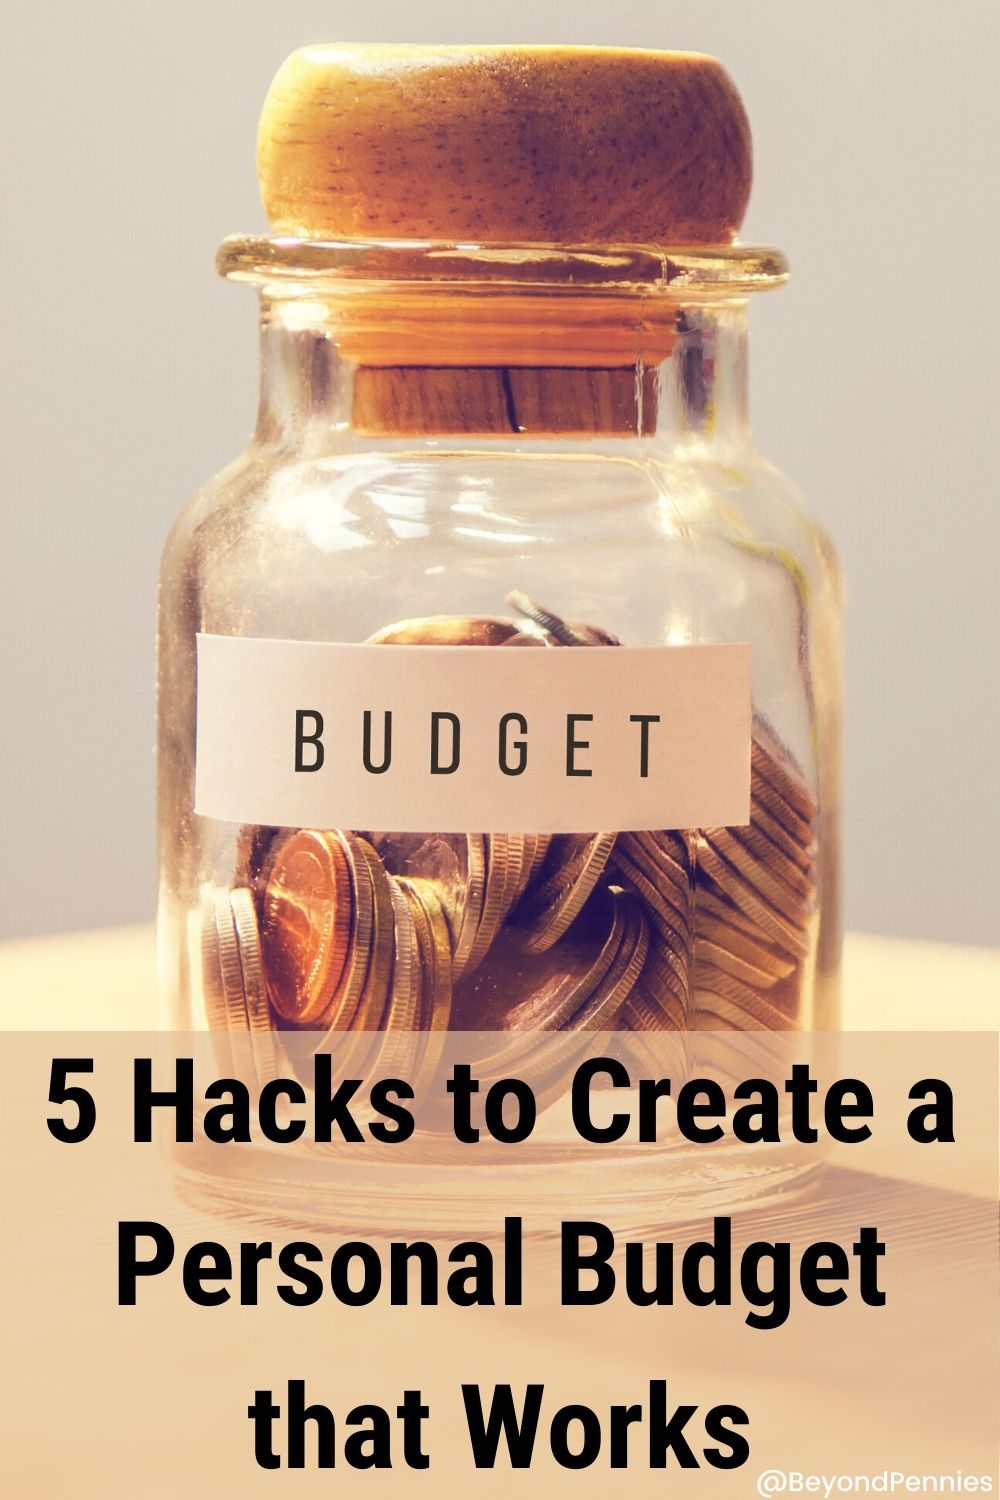 5 Hacks to Create a Personal Budget that Works